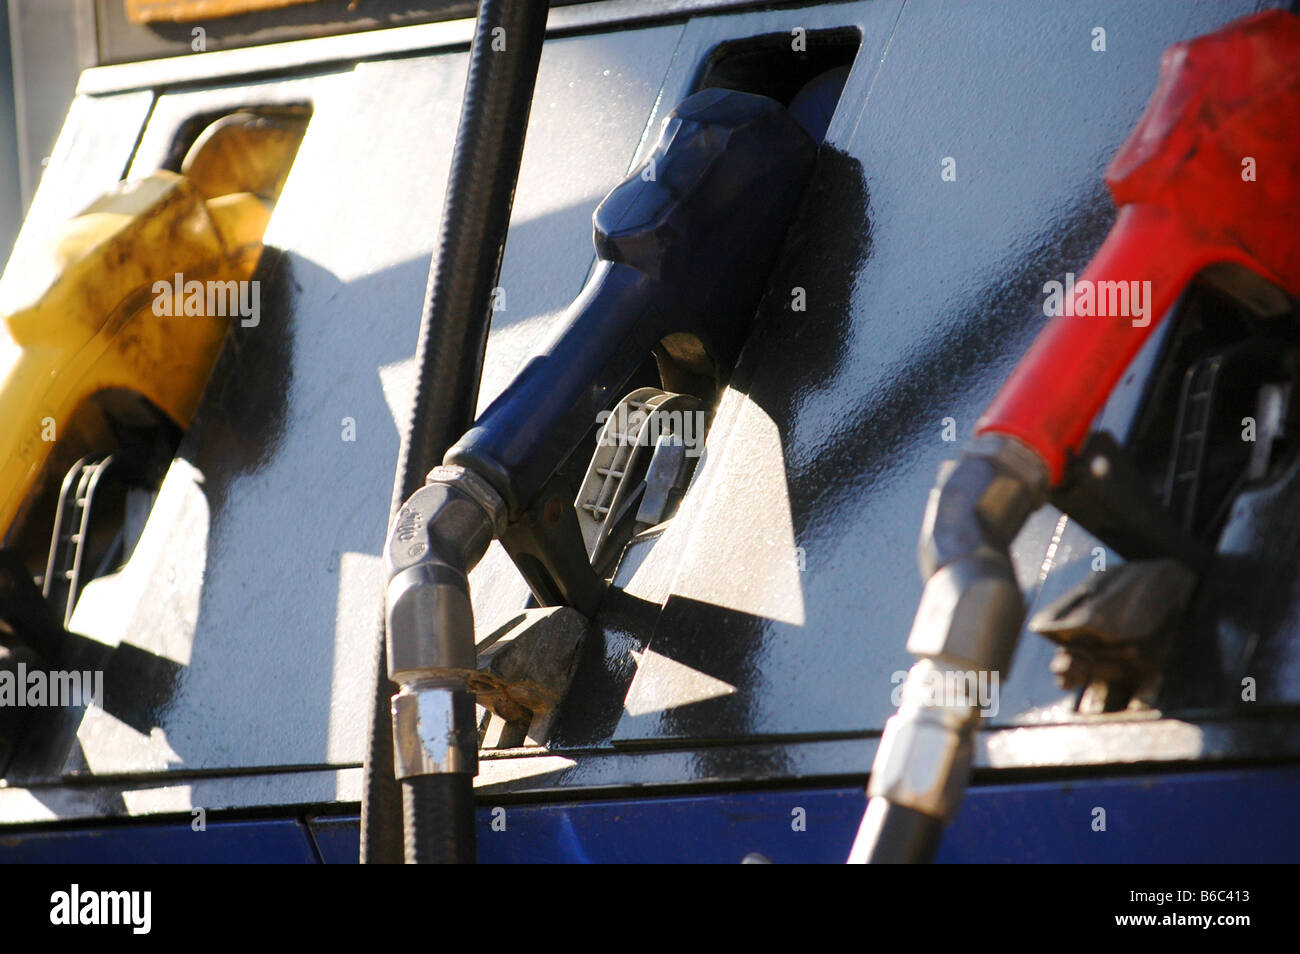 Gas station pumps with various grades of fuel. Stock Photo